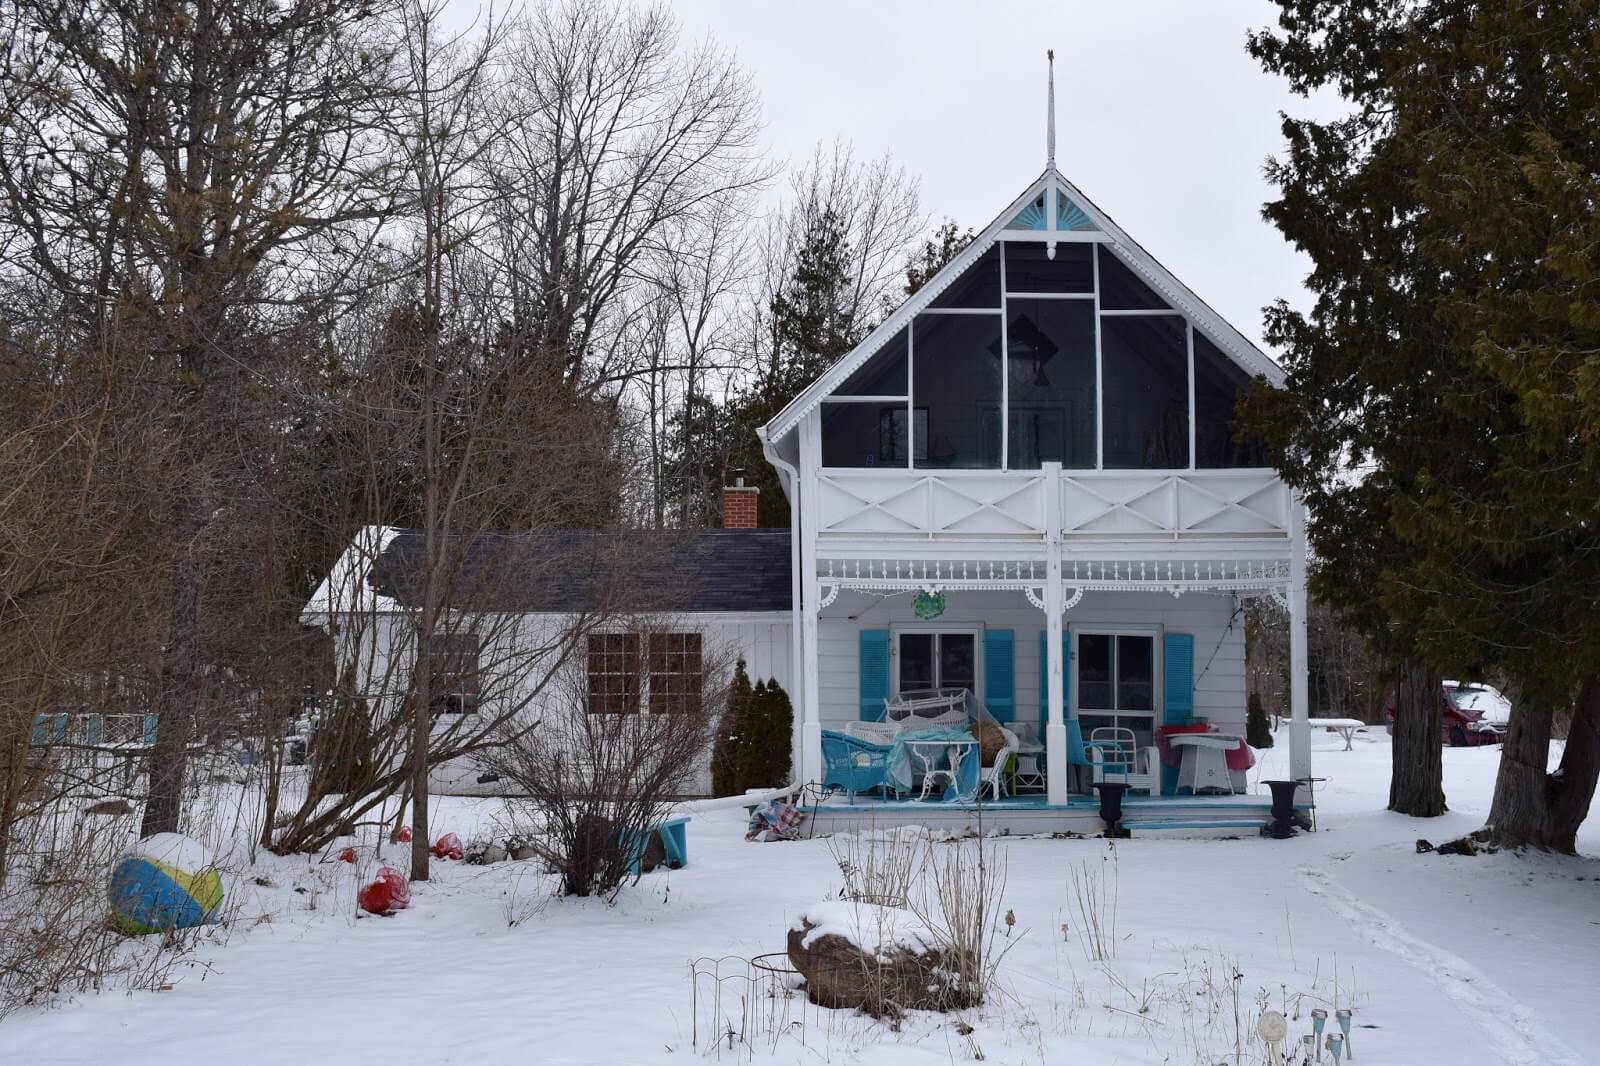 A medium sized cottage in the winter time with Ontario resort Architecture surrounded by snow